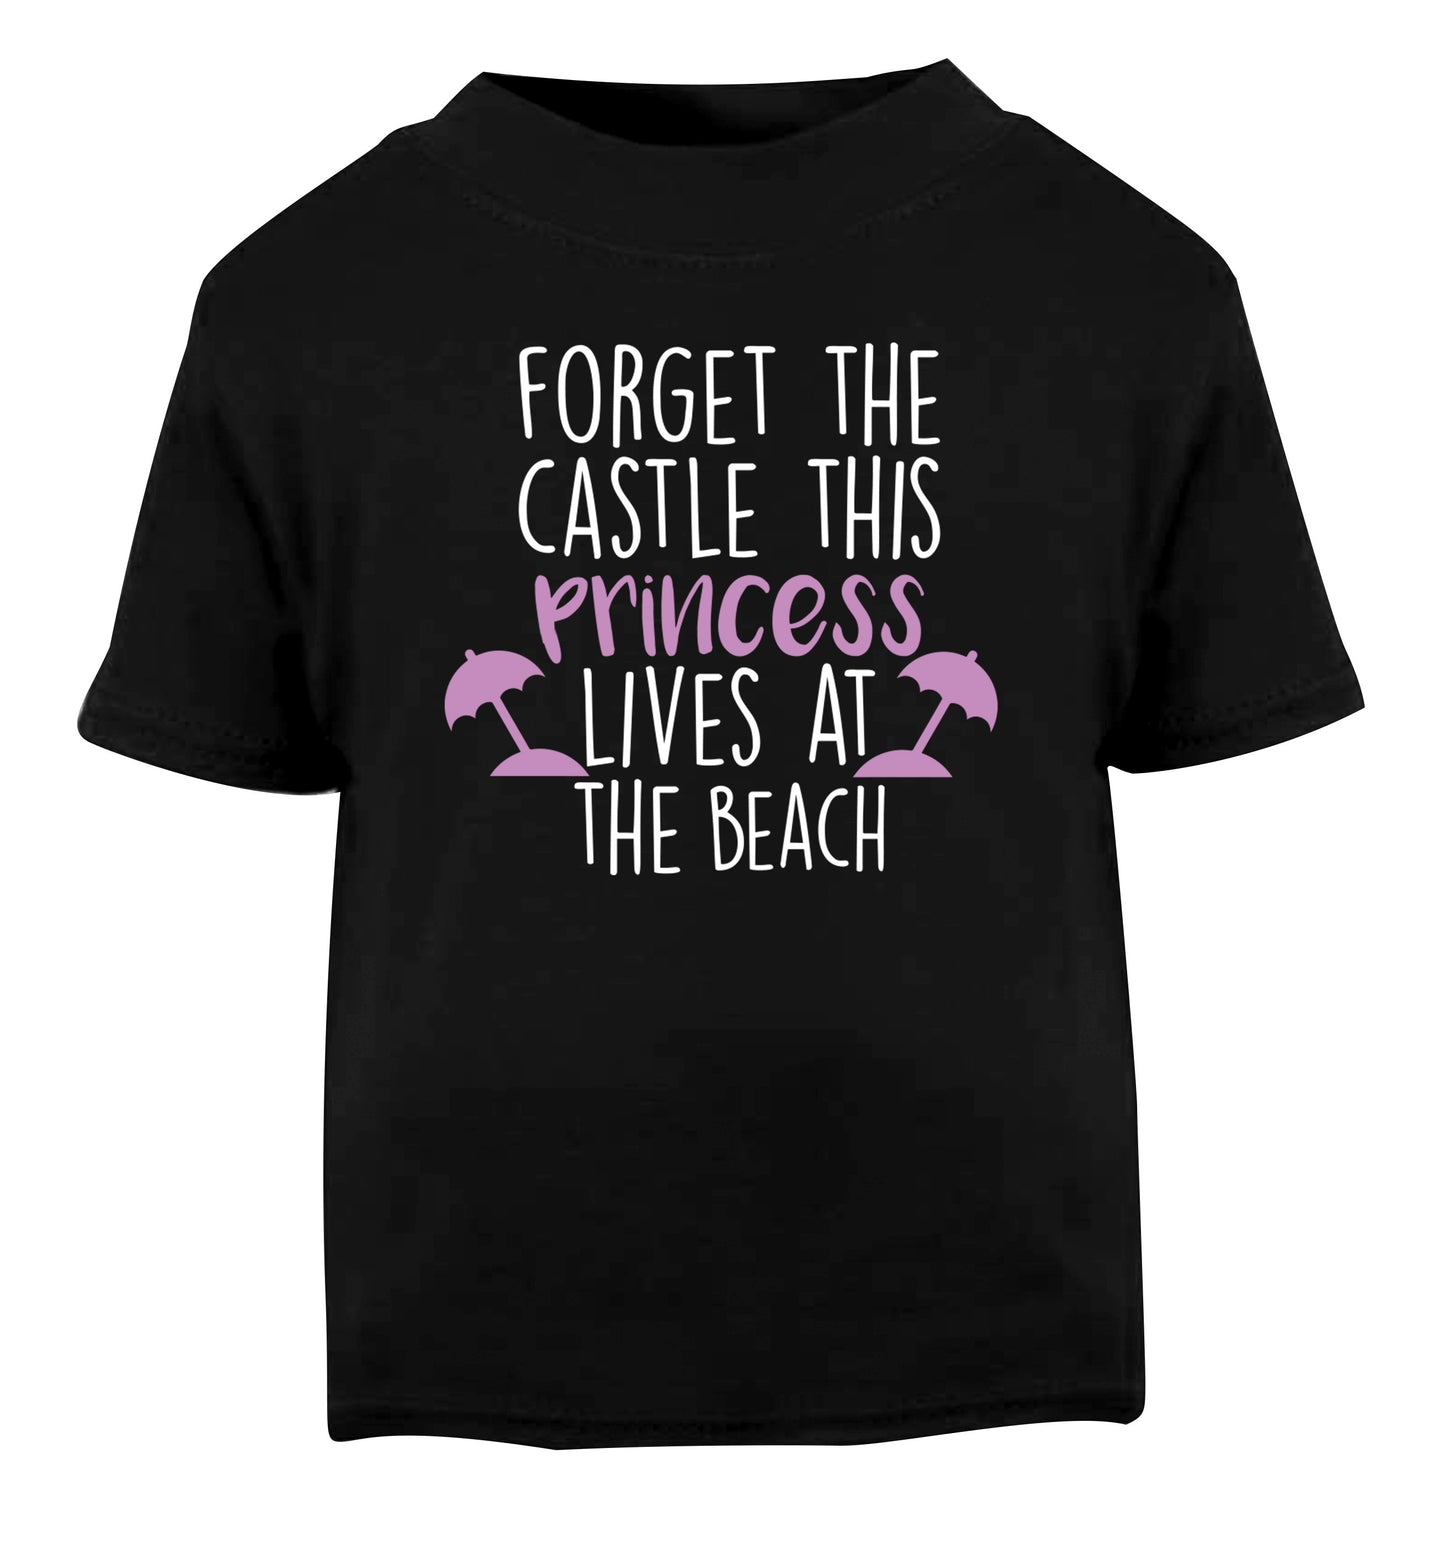 Forget the castle this princess lives at the beach Black Baby Toddler Tshirt 2 years